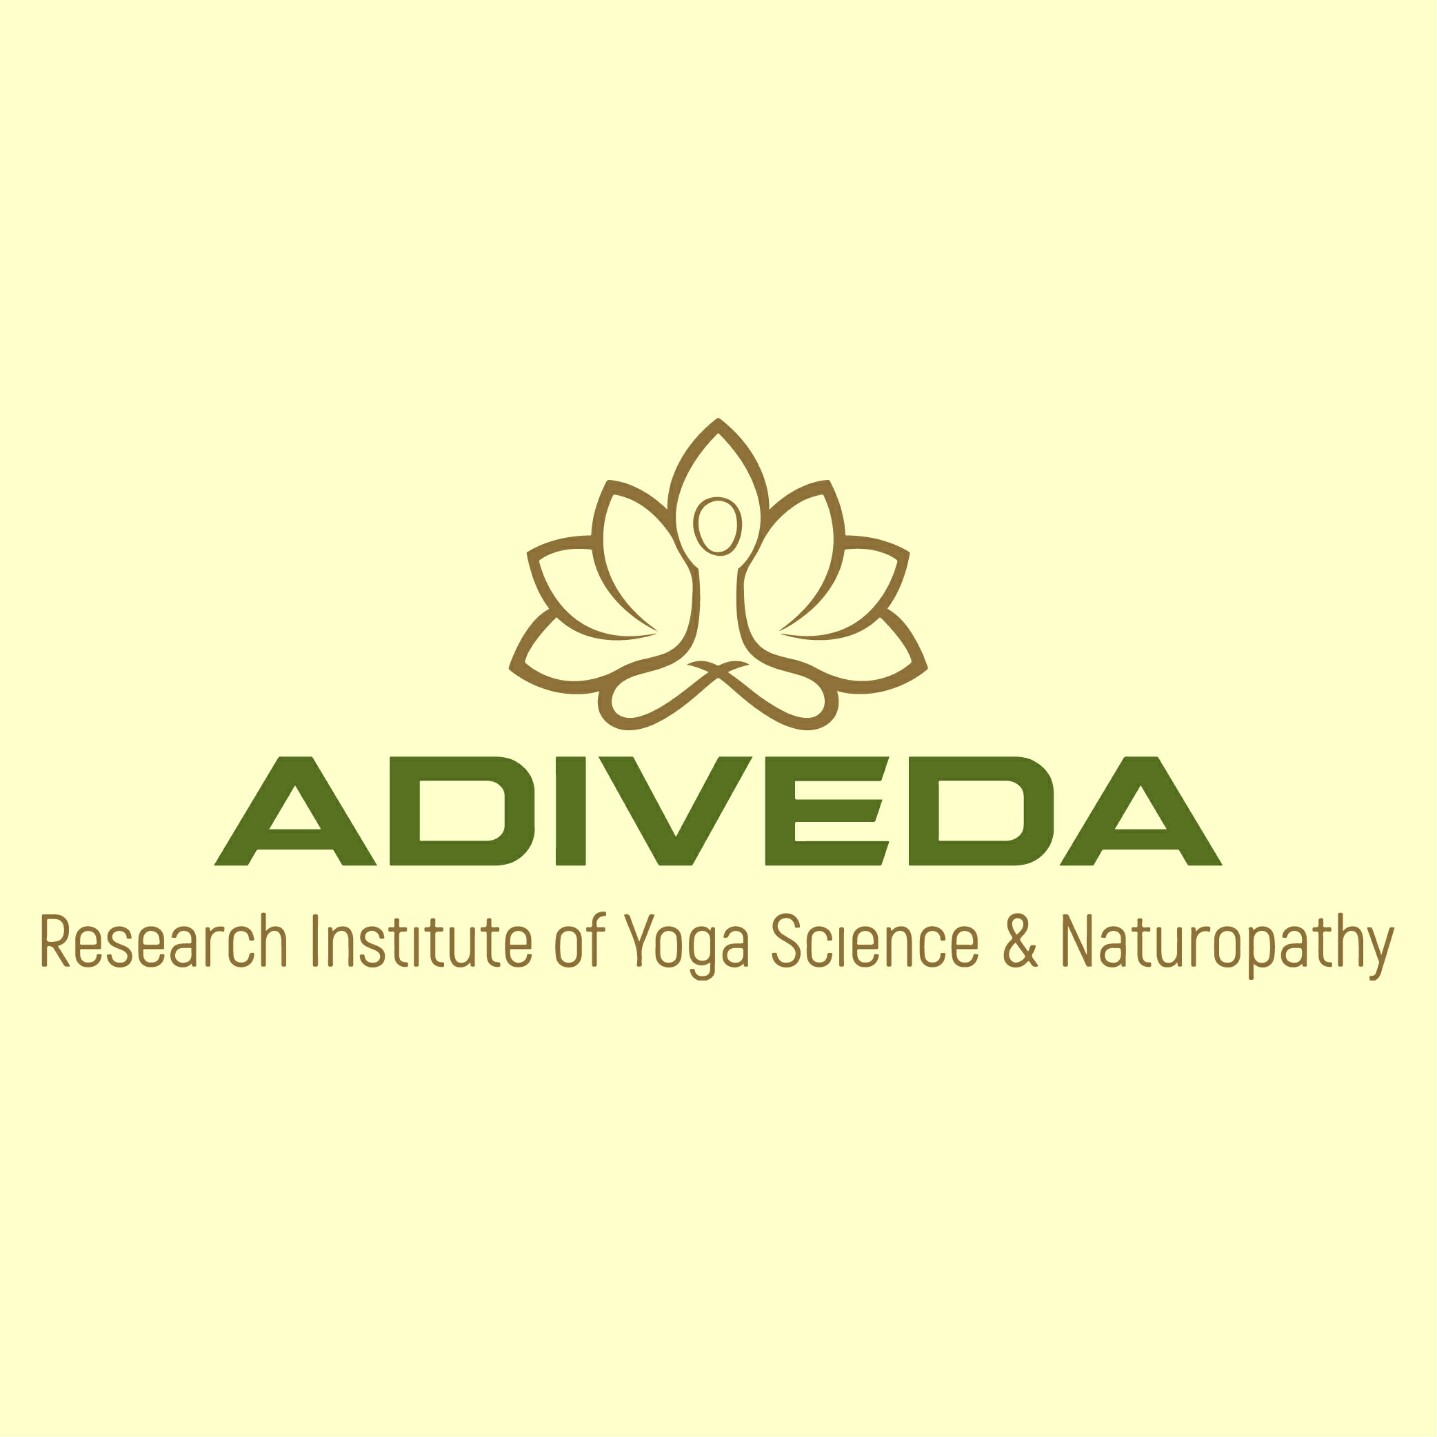 Adiveda Research Institute of Yoga Science and Naturopathy logo